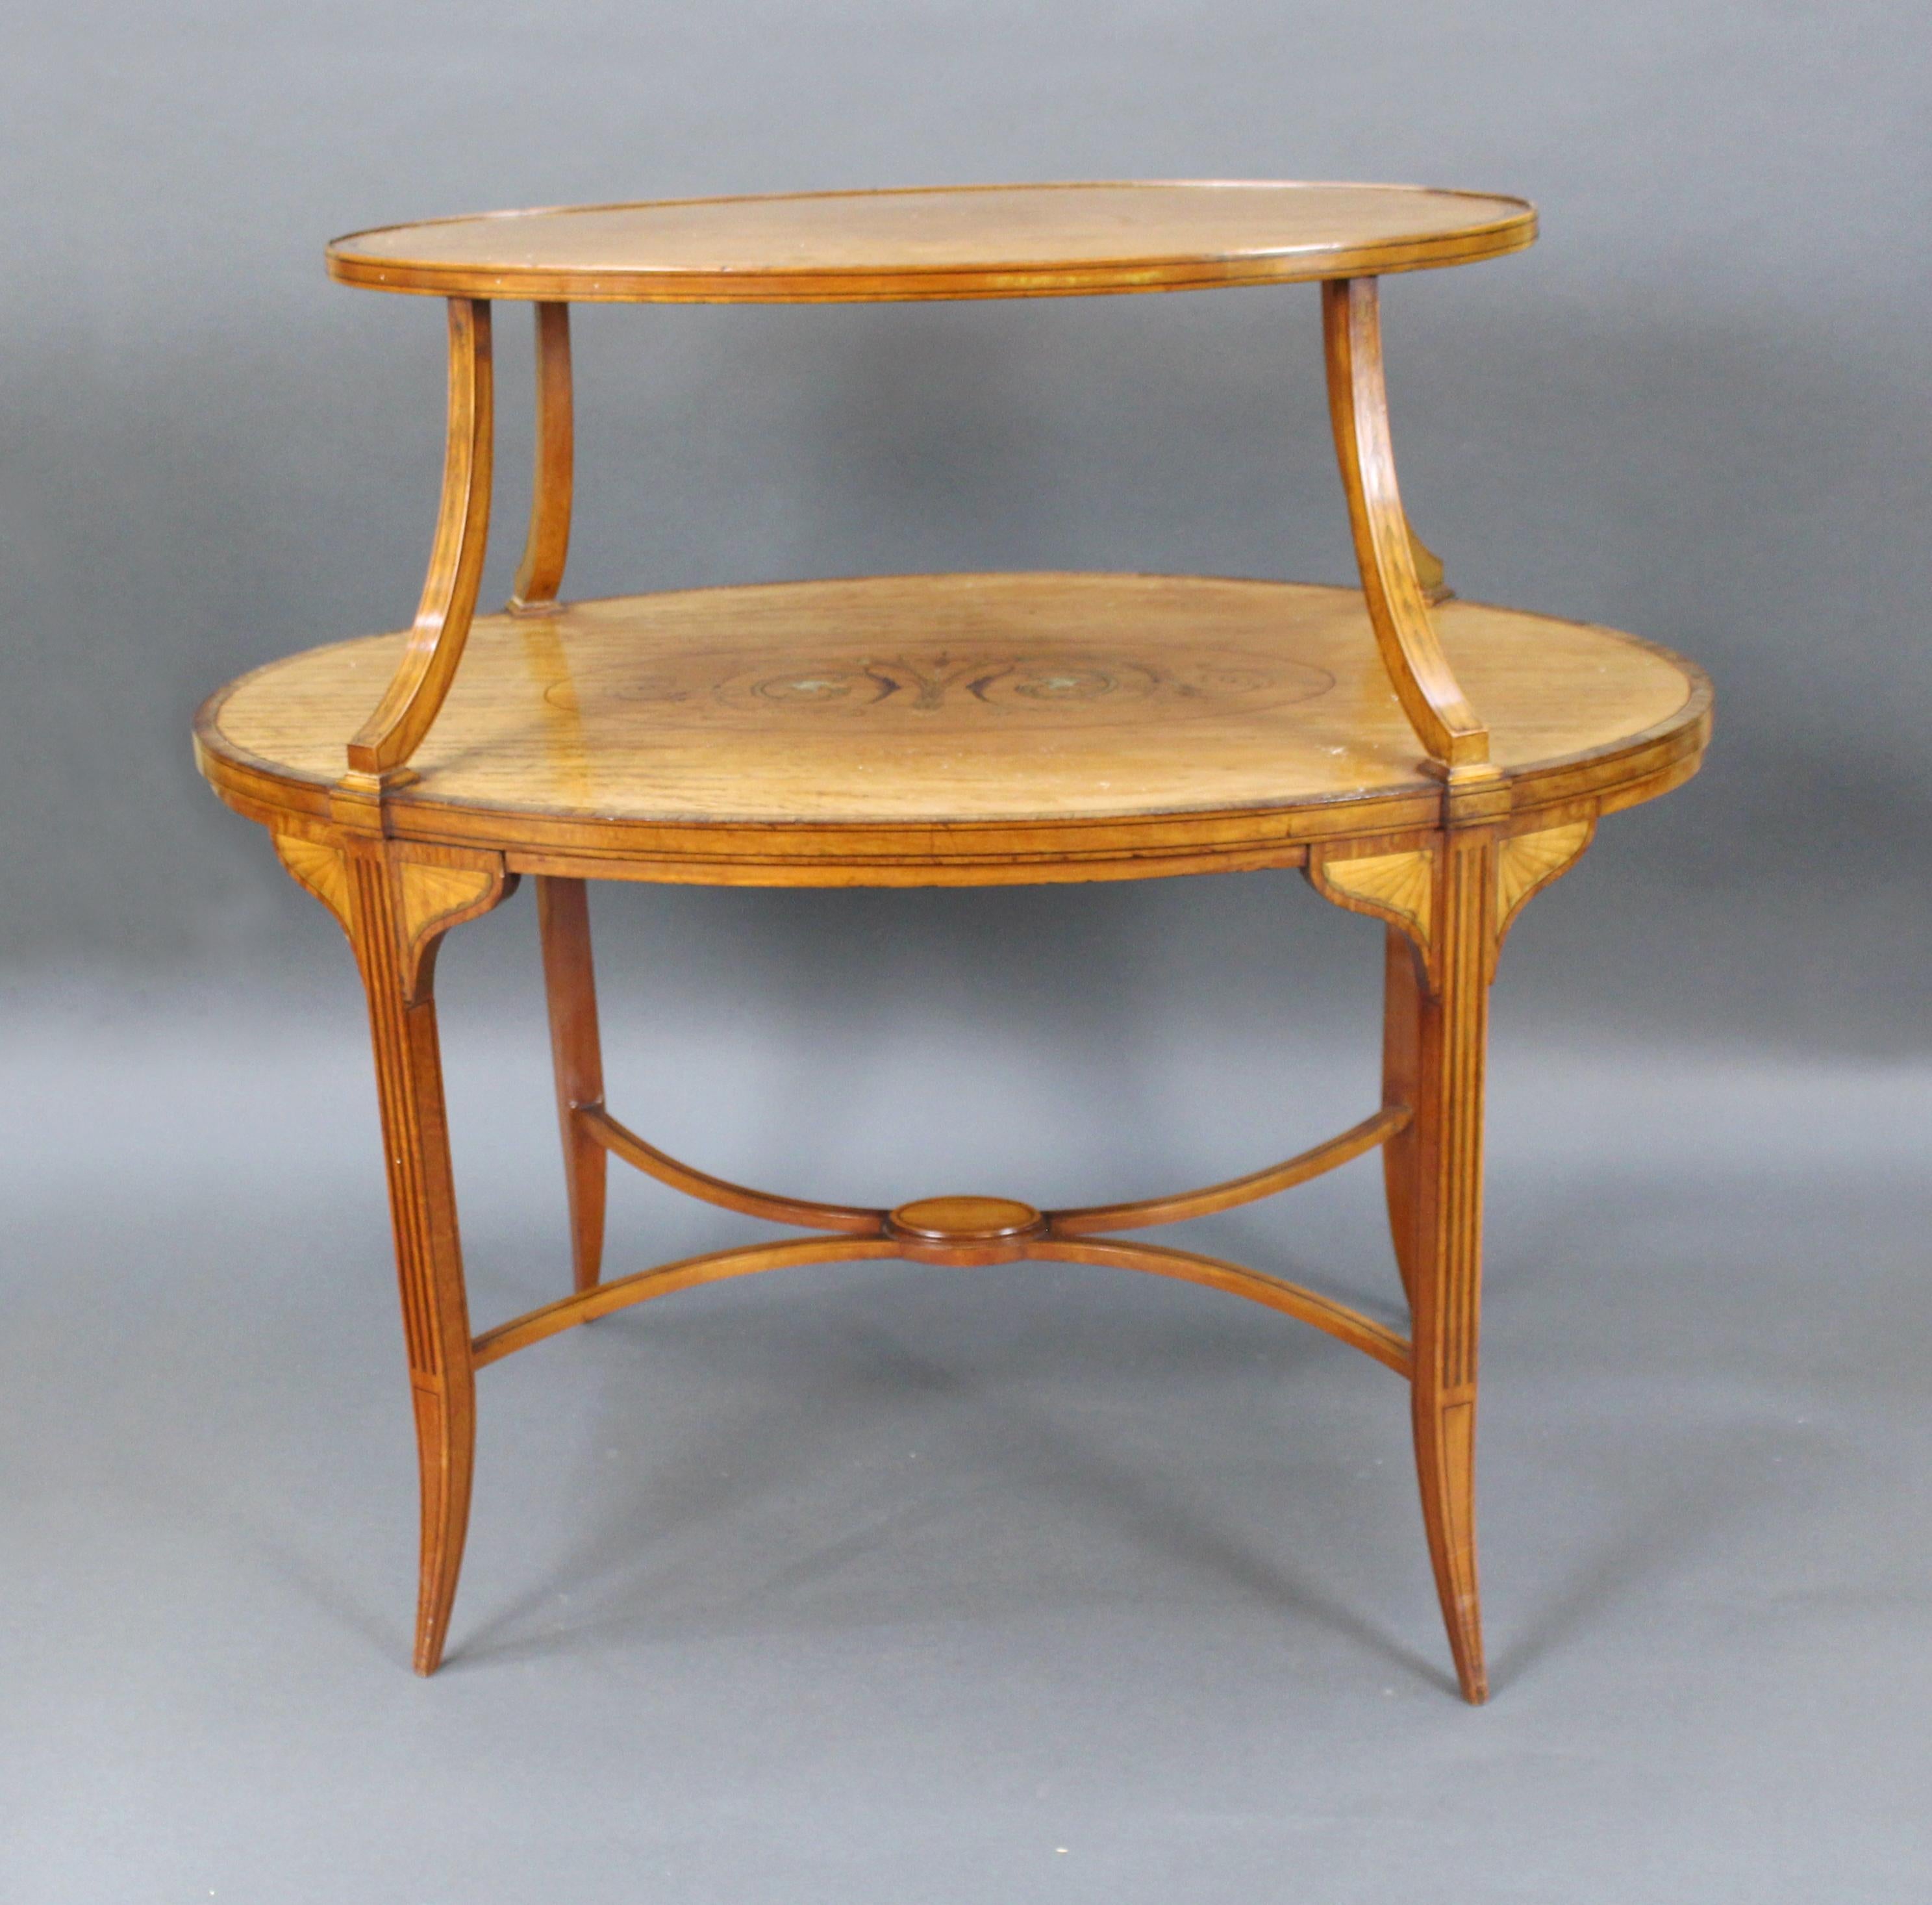 Period: Late 19th century

Wood: Satinwood, inlaid

Condition: 
Very good condition commensurate with age. Nice color. Sturdy, one or two old repairs to the frame.
 
Lovely looking oval two tier satinwood étagère

Attractive mellow patina